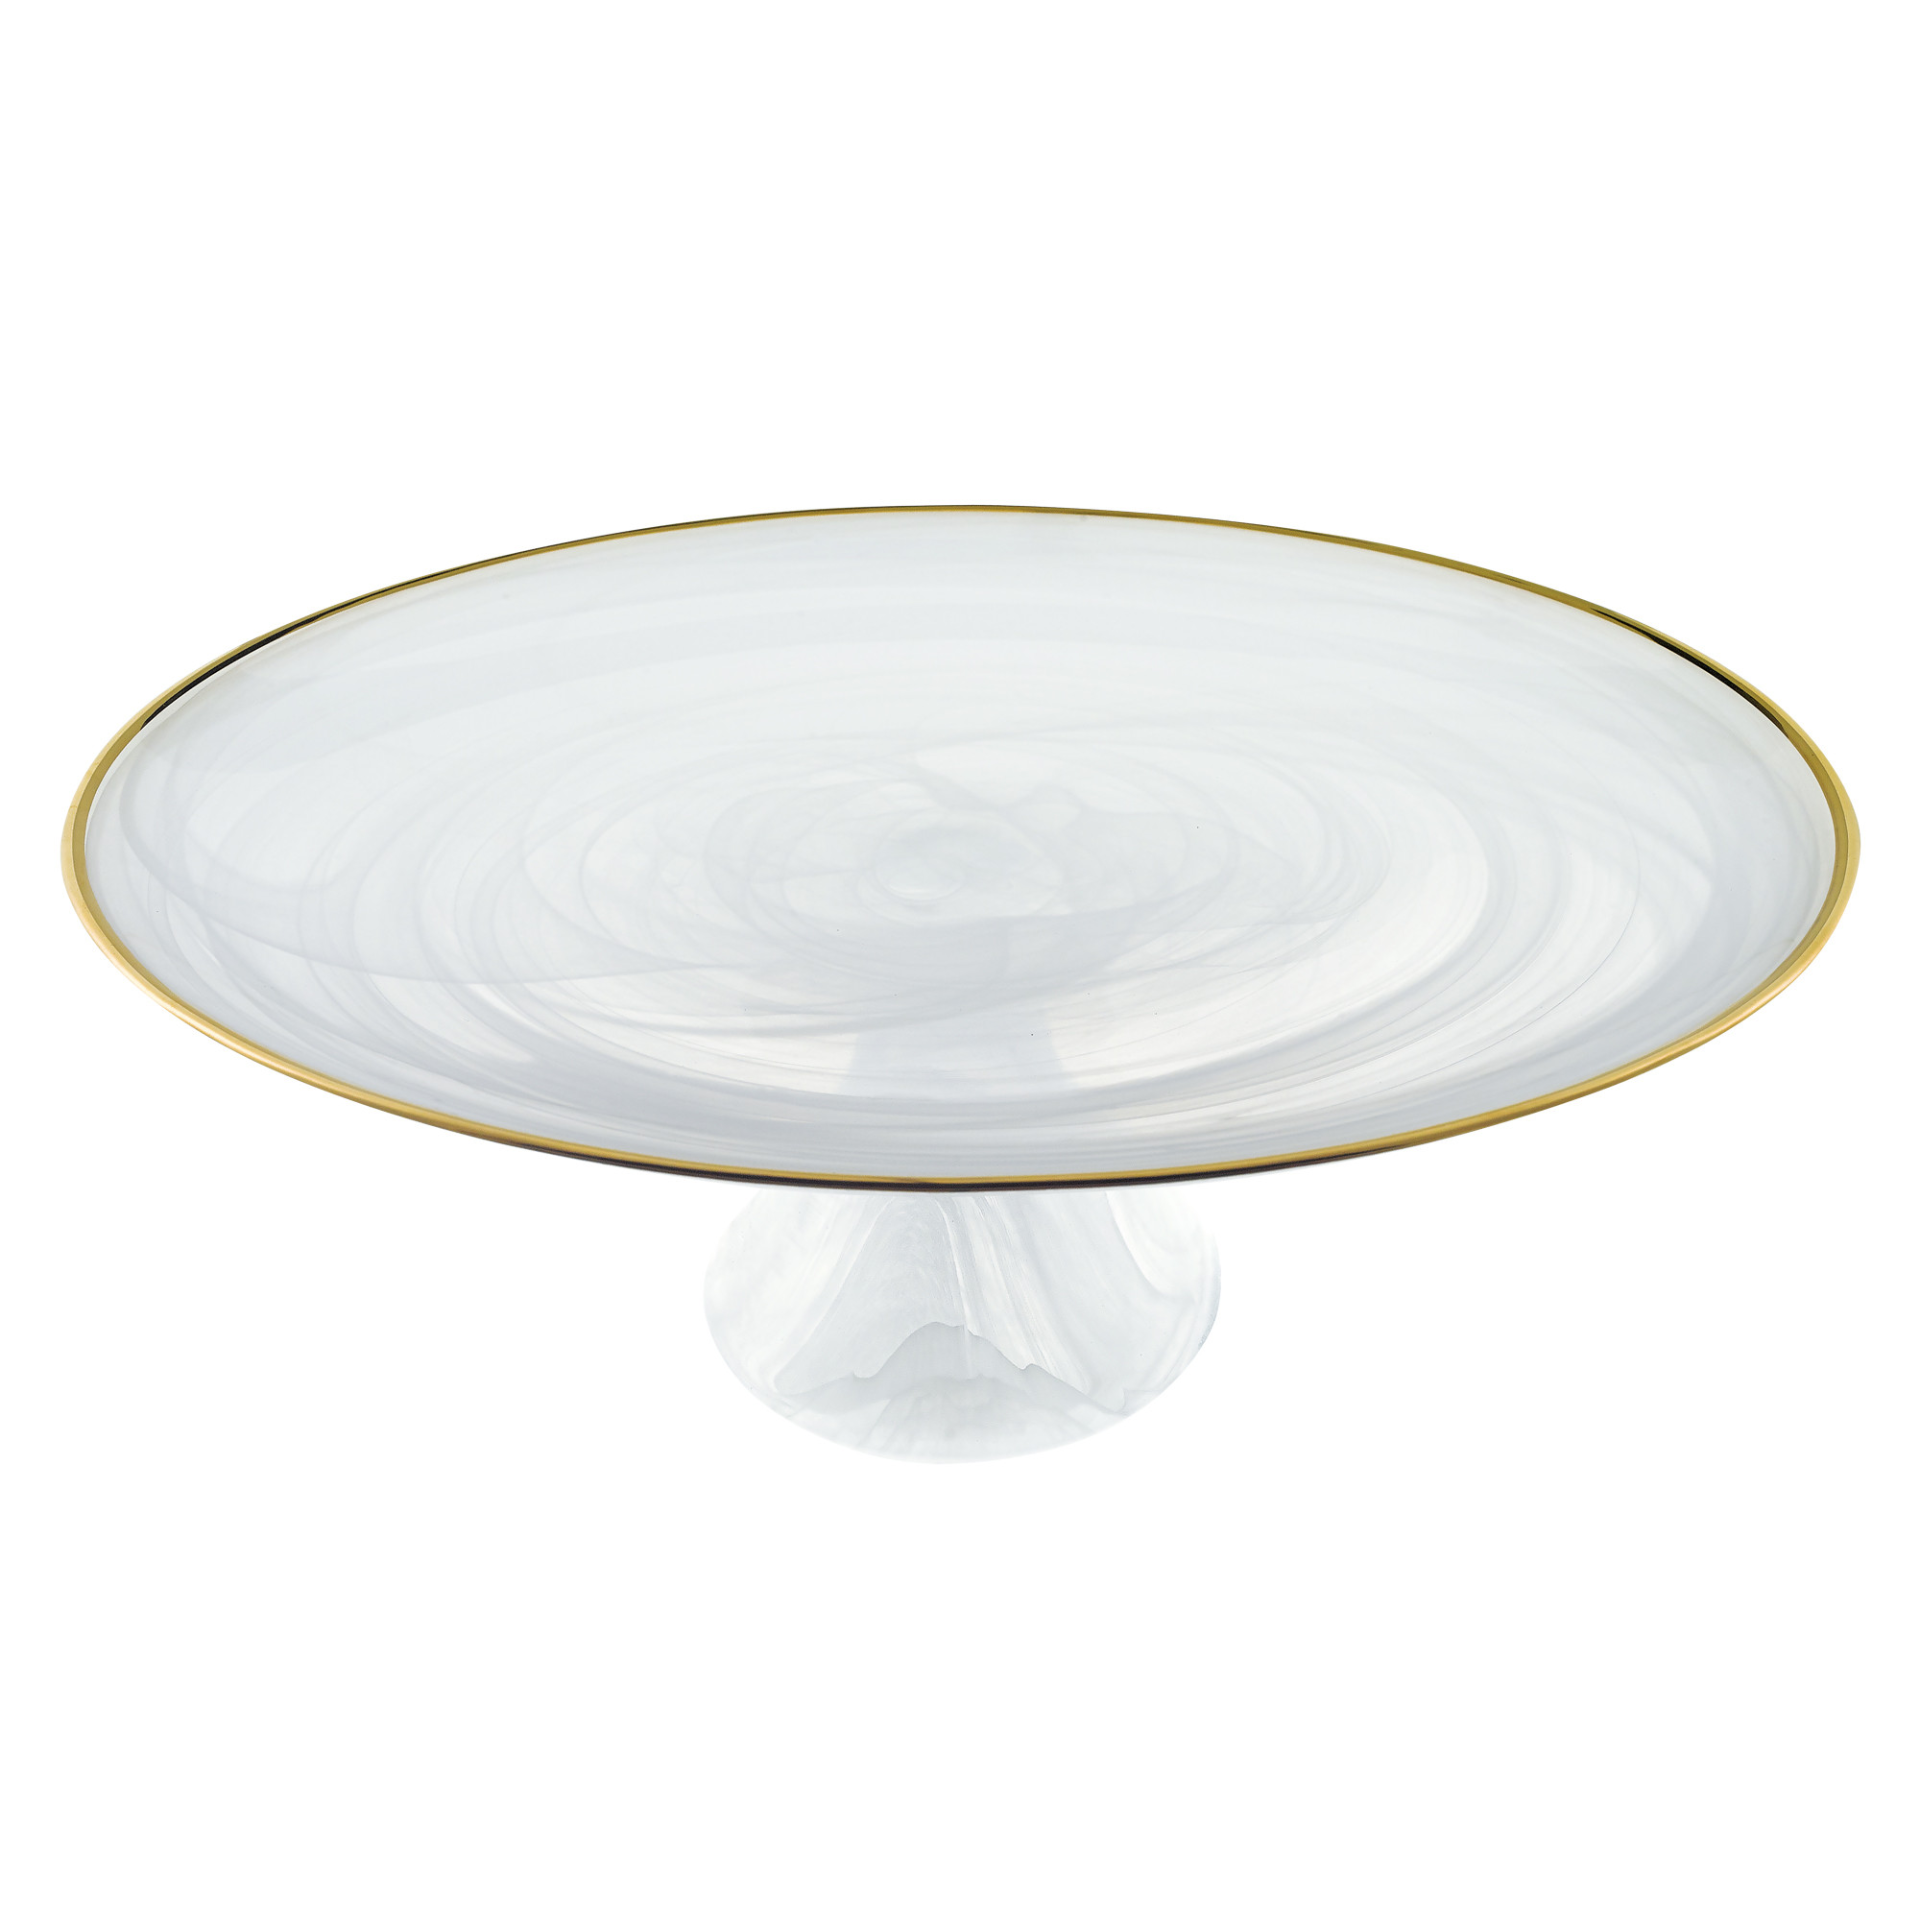 Handcrafted Optical Glass And White Gold Footed Cakestand With Gold Rim